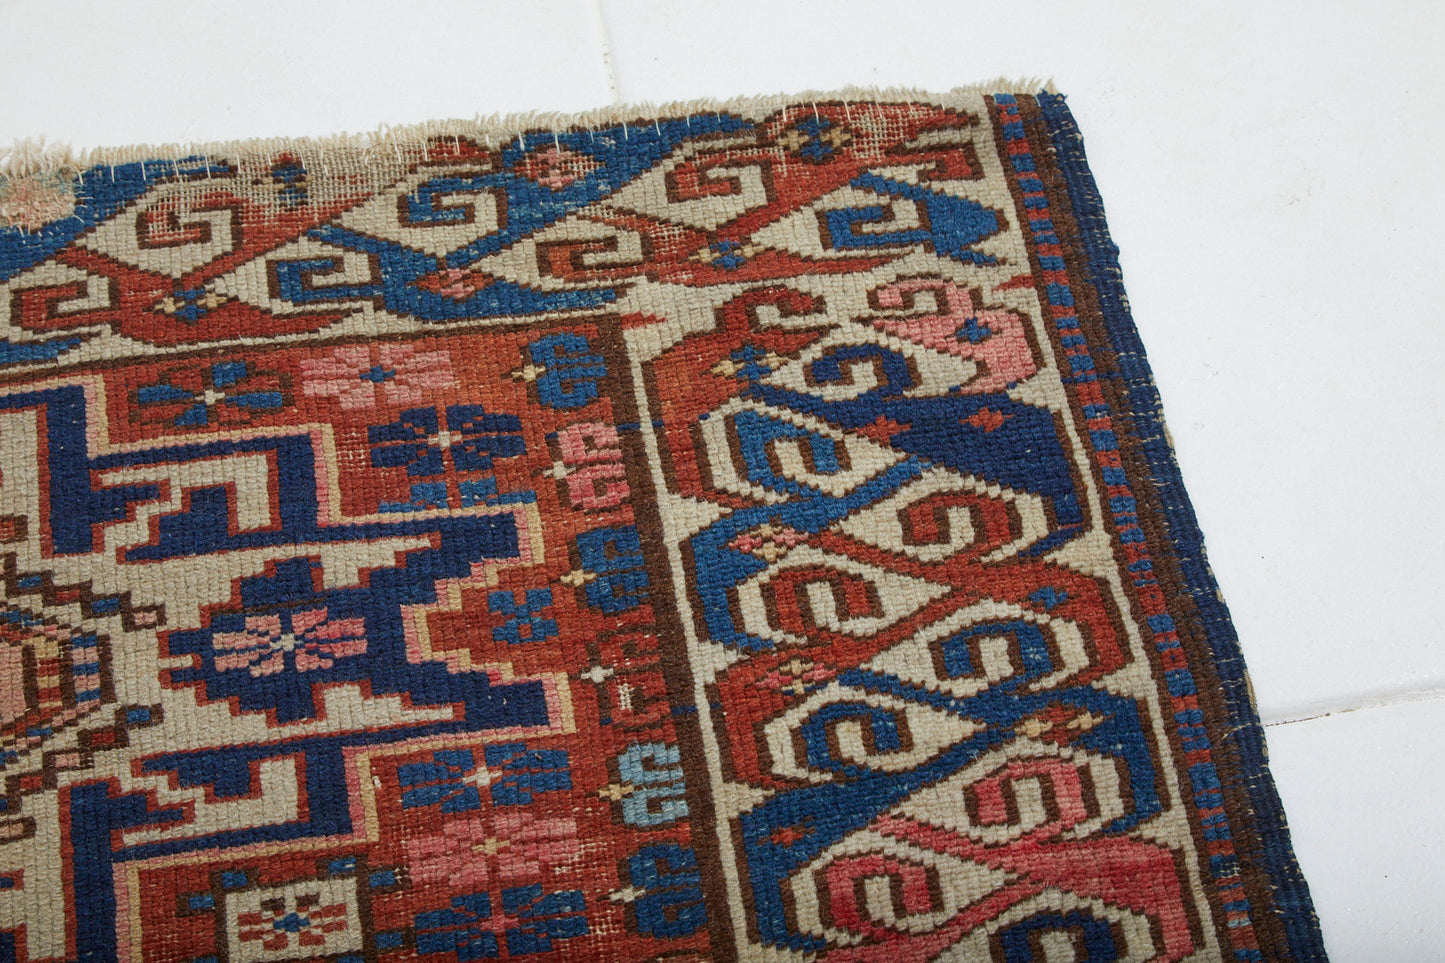 Antique hand woven Persian rug with cream and blue star and flower shapes on red base - Available from King Kennedy Rugs Los Angeles